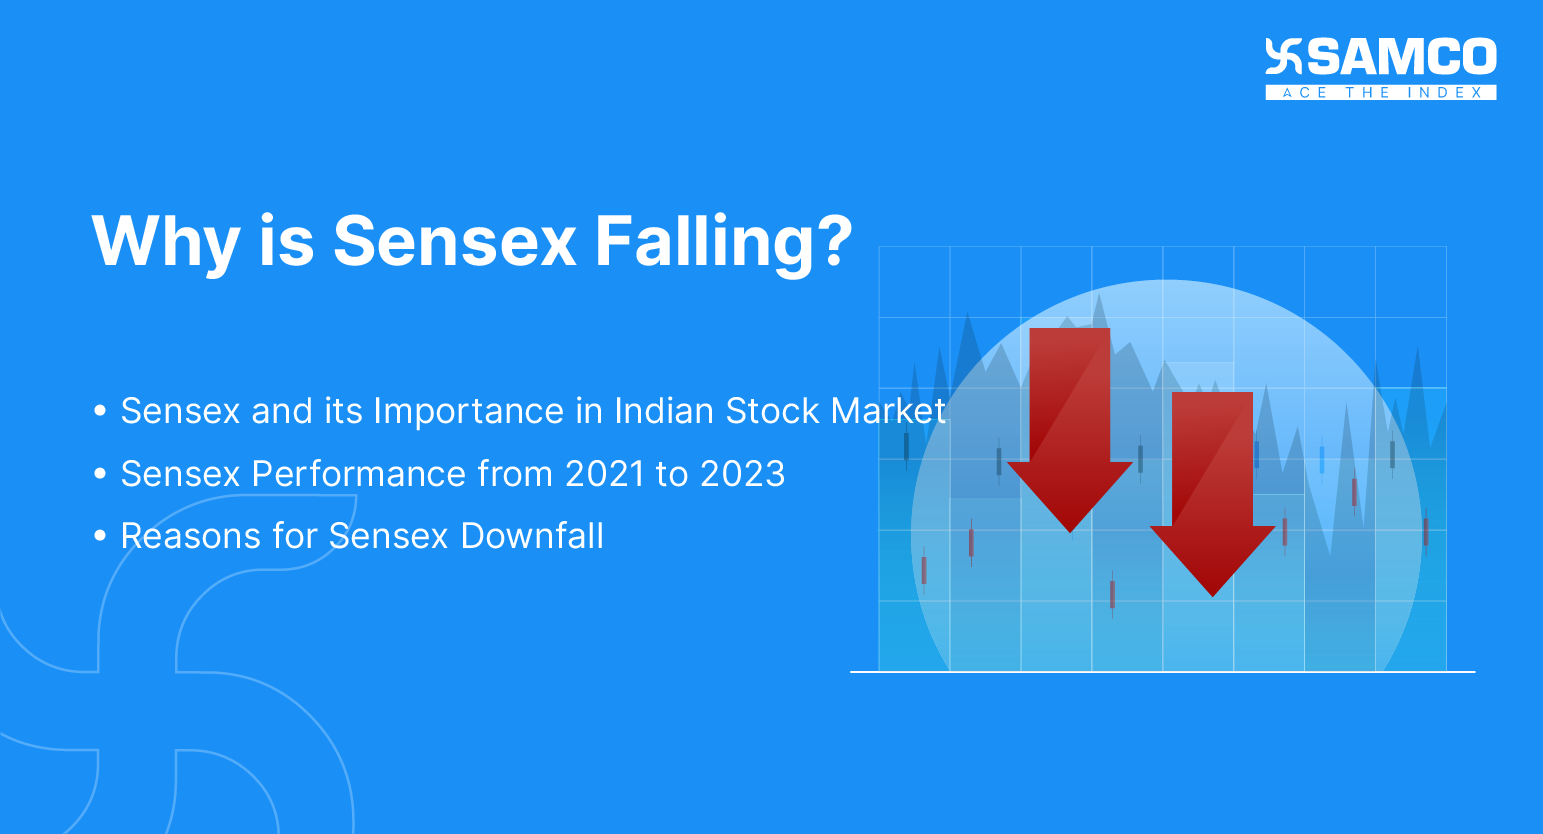 Why Sensex is Falling 